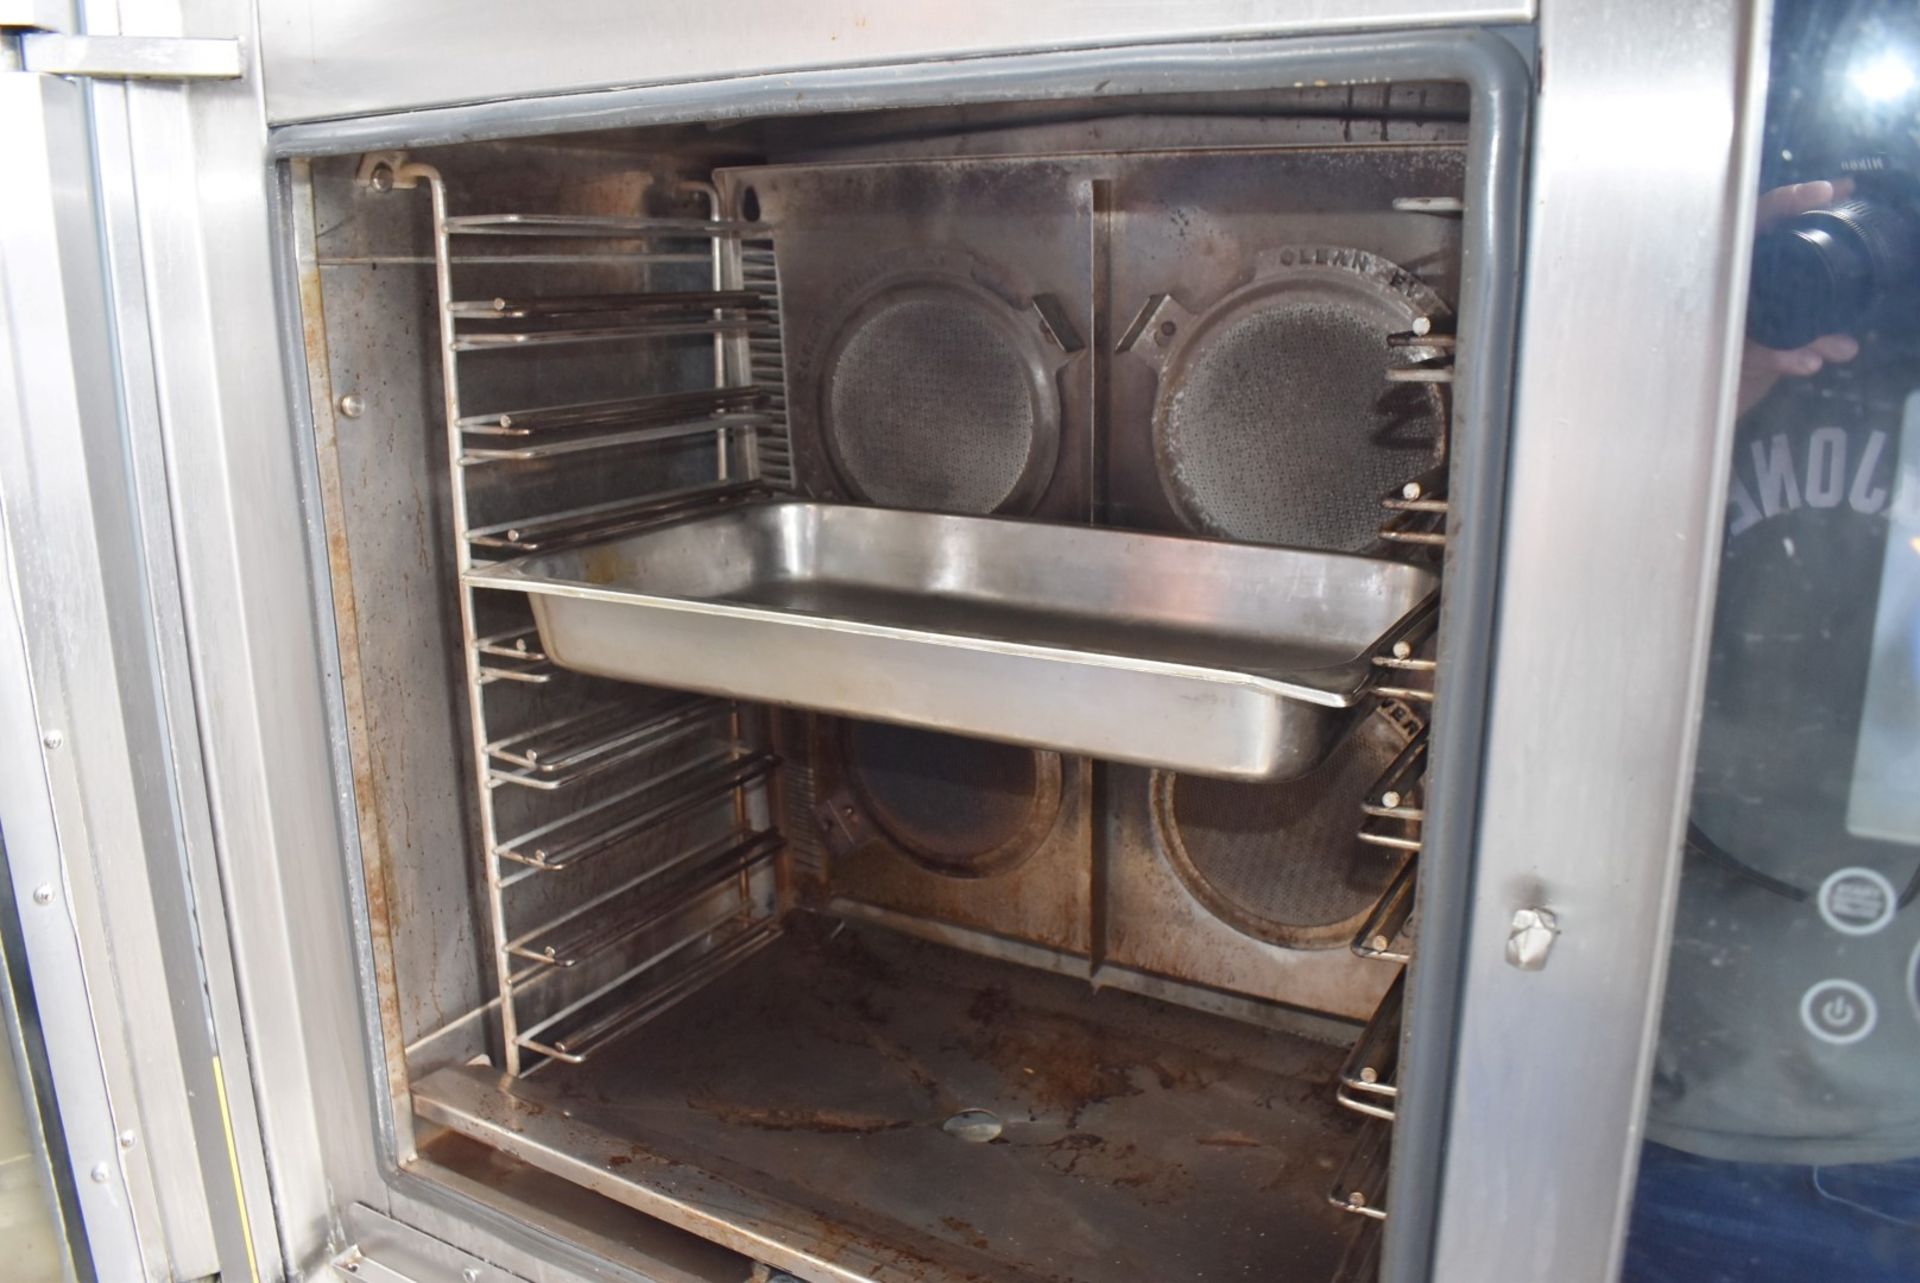 1 x Fri-Jado Turbo Retail 8 Grid Combi Oven - 3 Phase Combi Oven With Various Cooking Programs - Image 23 of 24